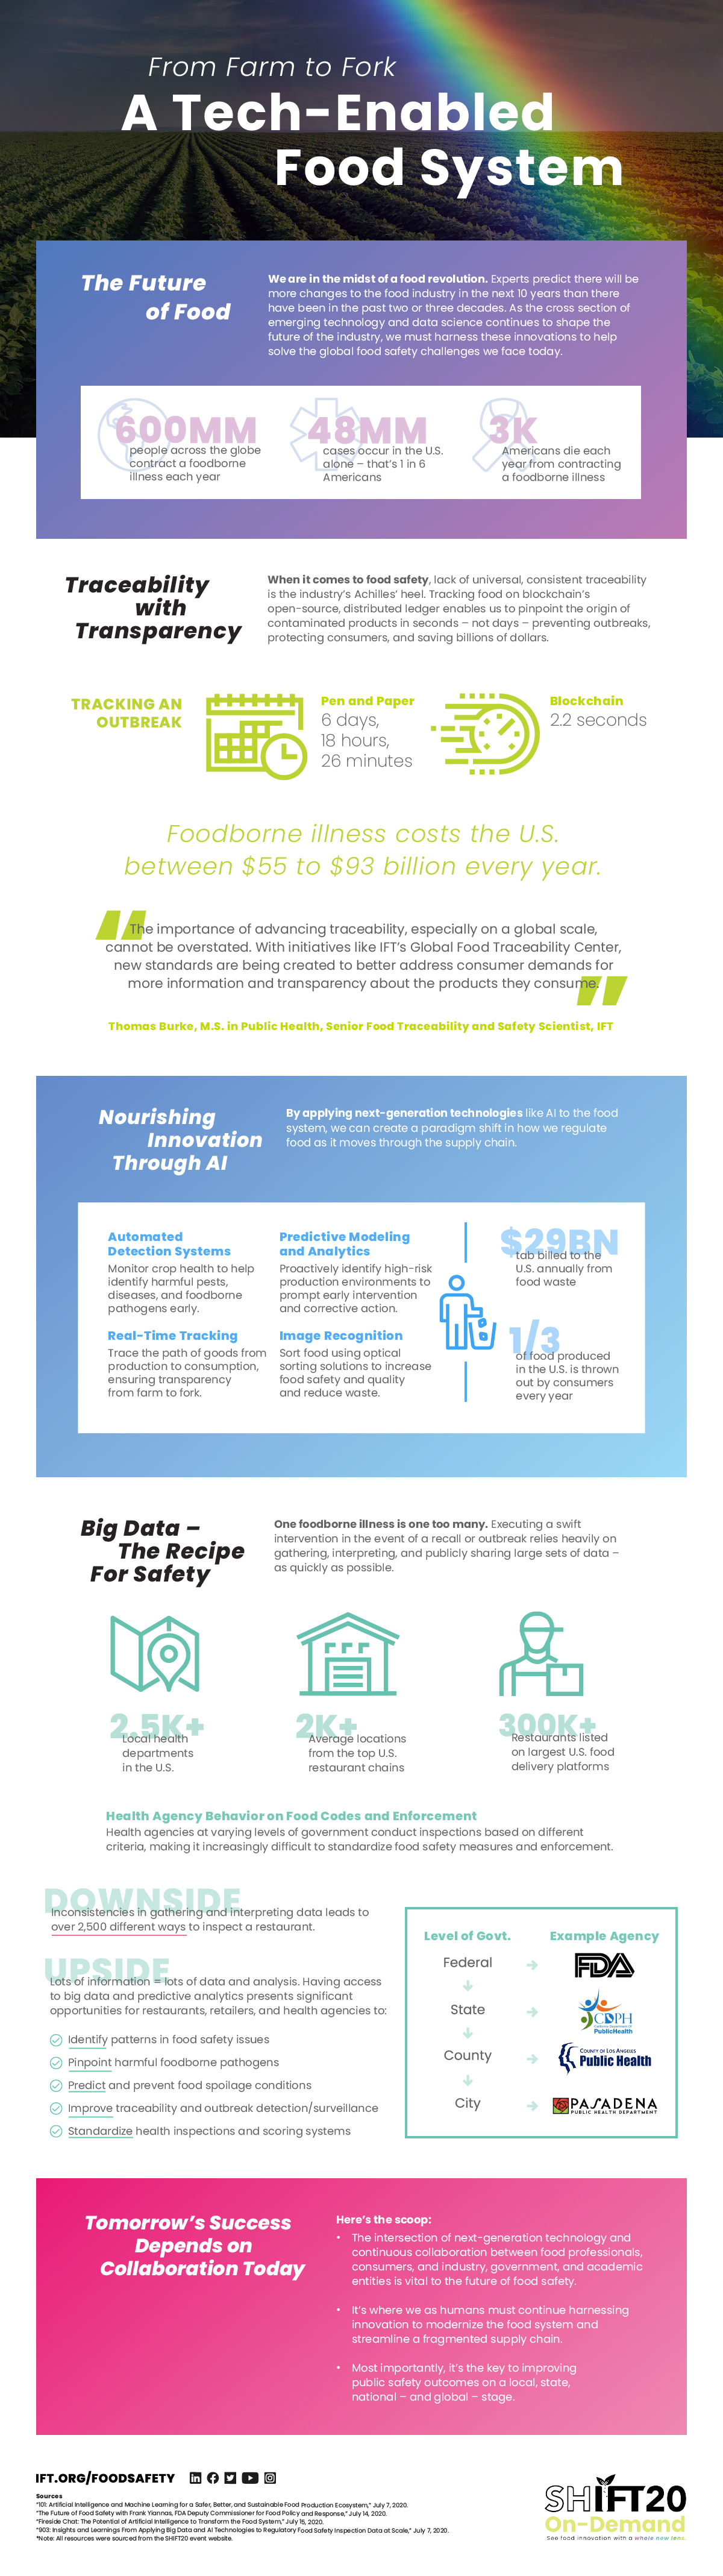 Future of Food, Food Safety, Traceability, Innovation Infographic